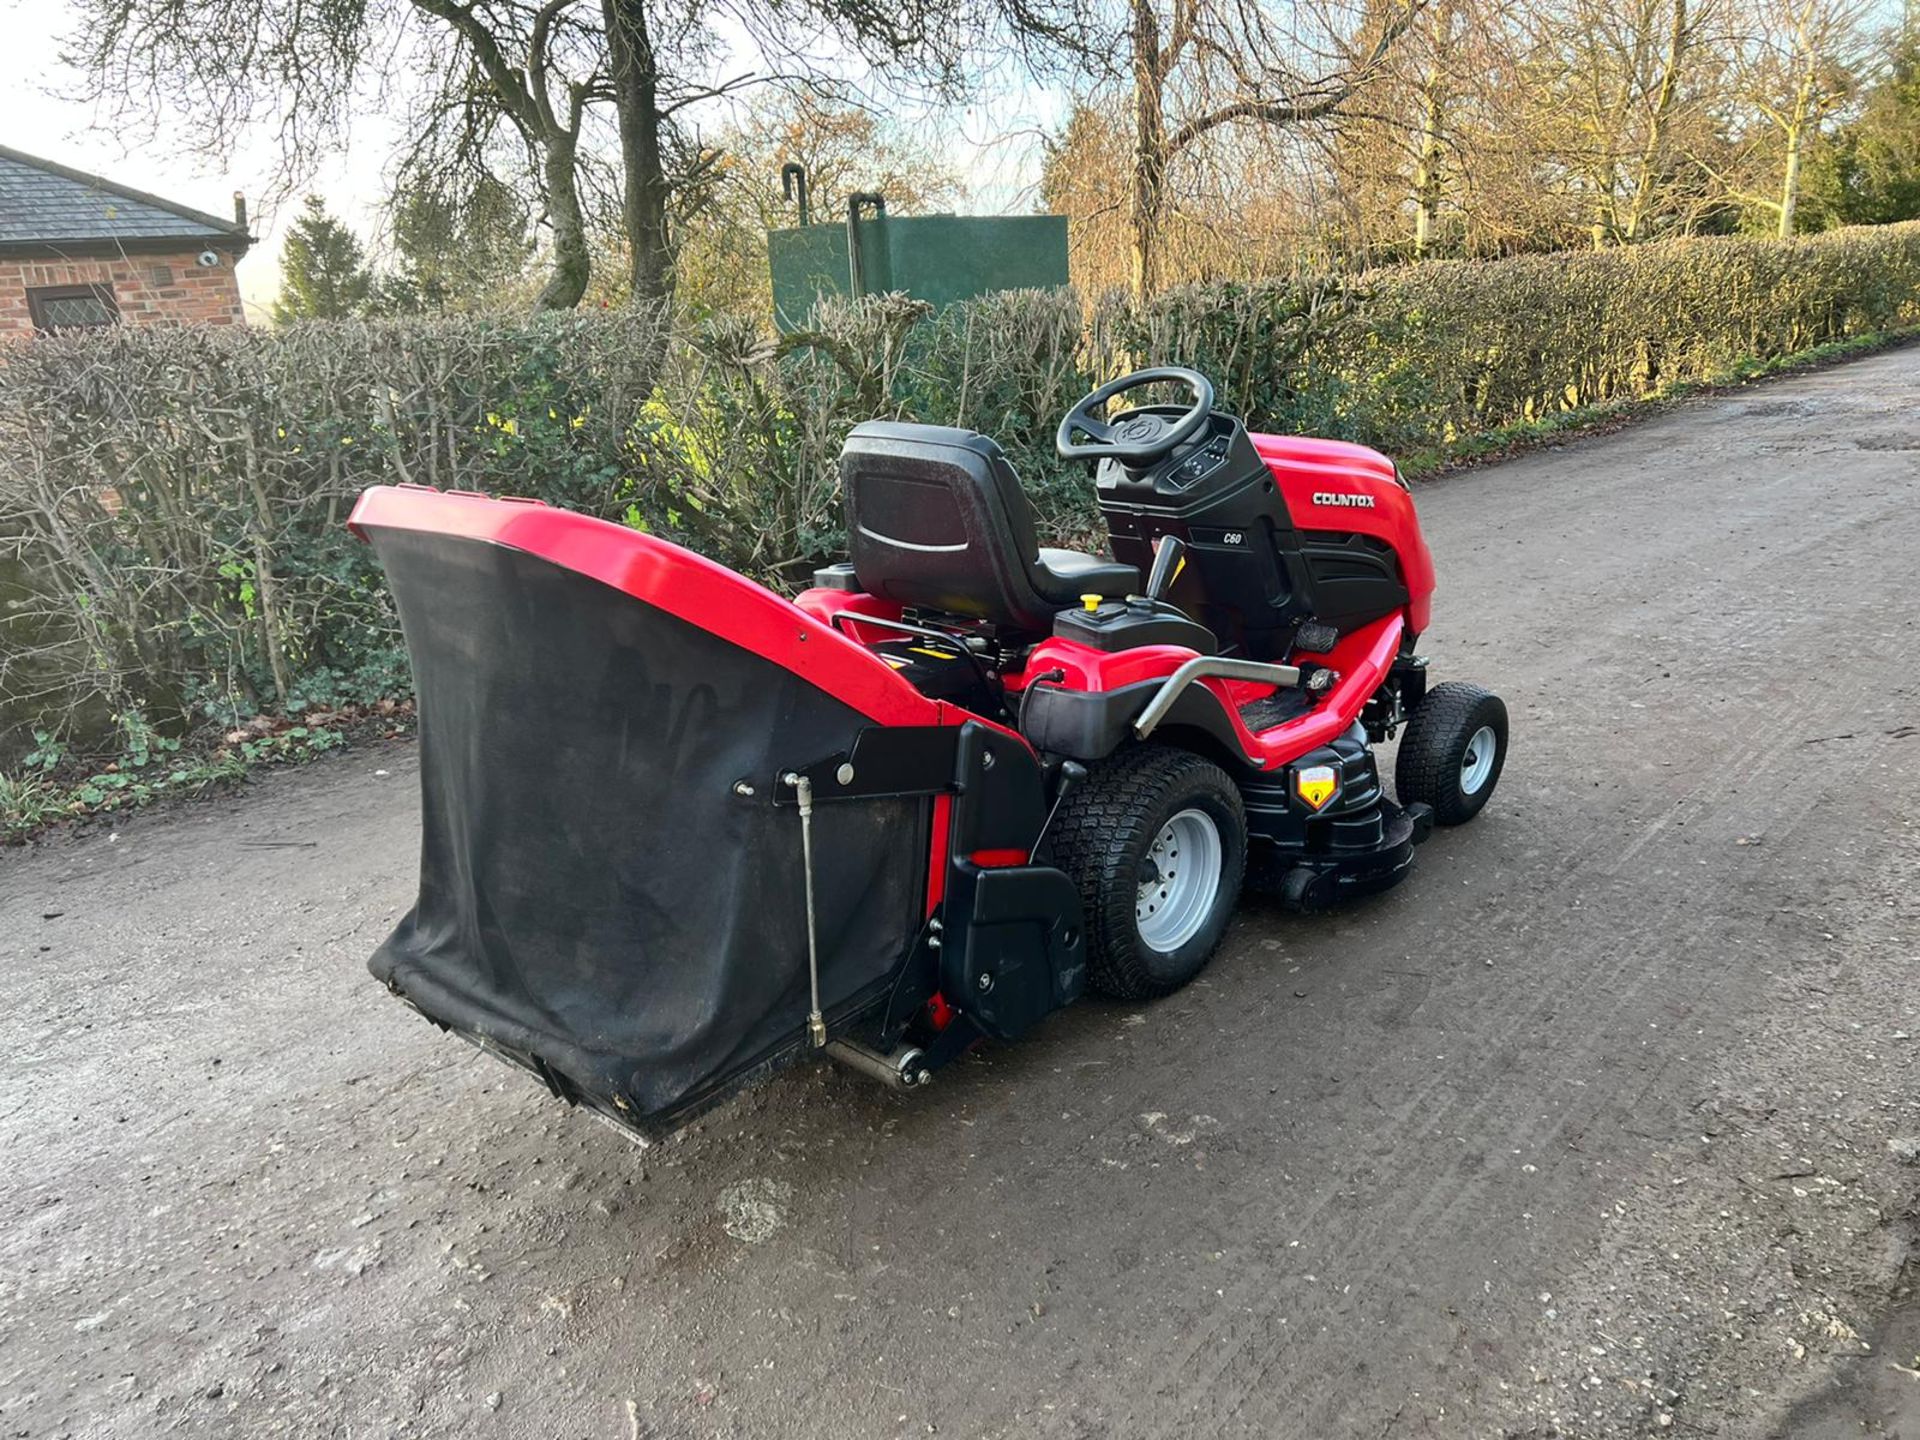 2016 WESTWOOD/COUNTAX 60 RIDE ON LAWN MOWER WITH PGC, SHOWING A LOW 102 HOURS *NO VAT* - Image 5 of 8